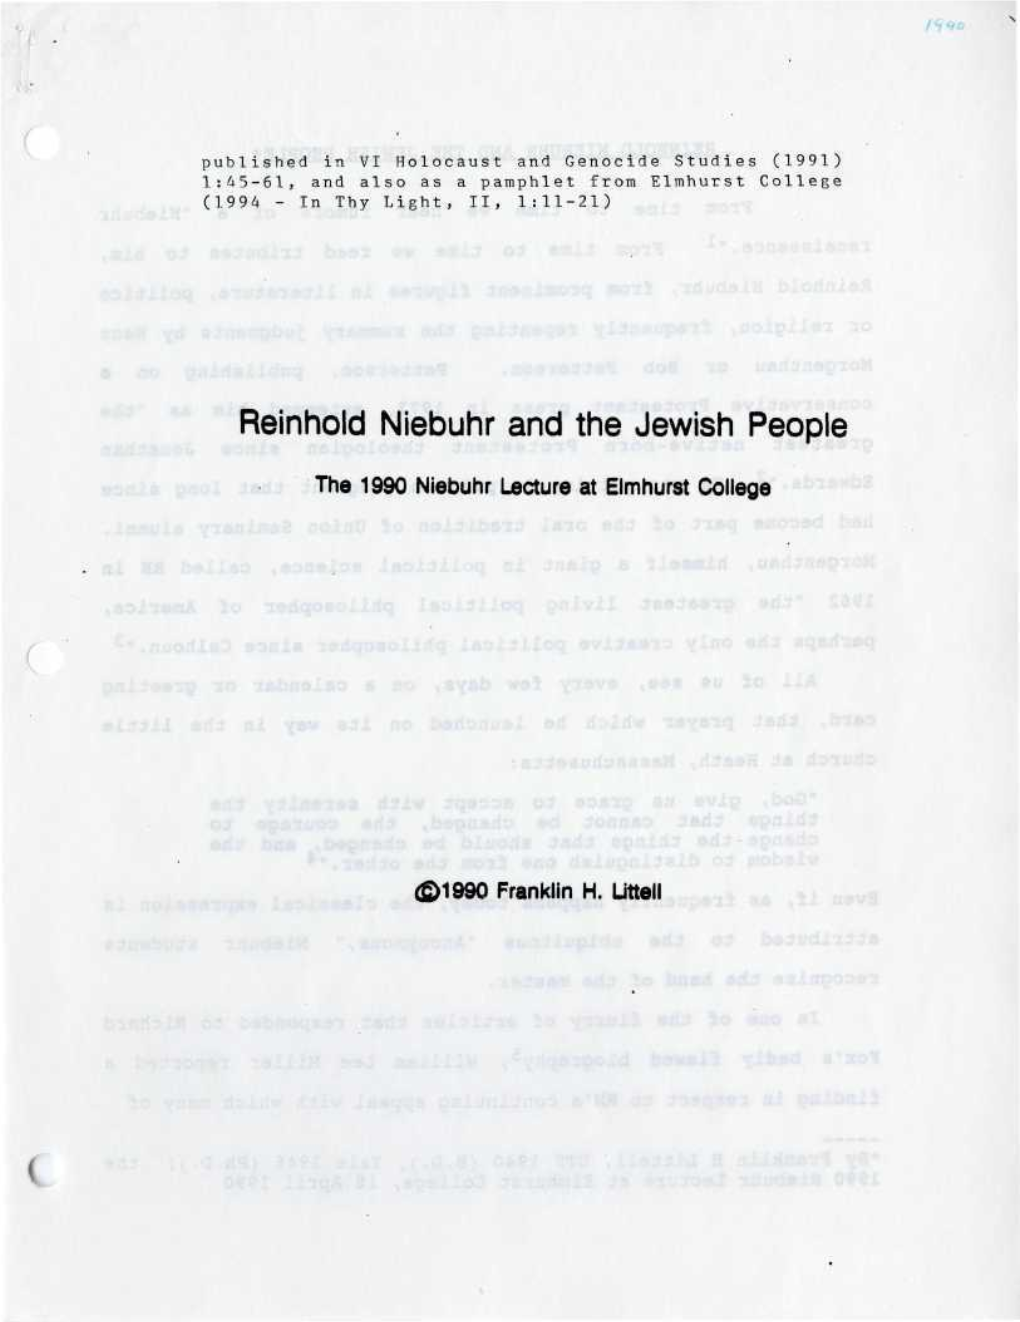 Reinhold Niebuhr and the Jewish People